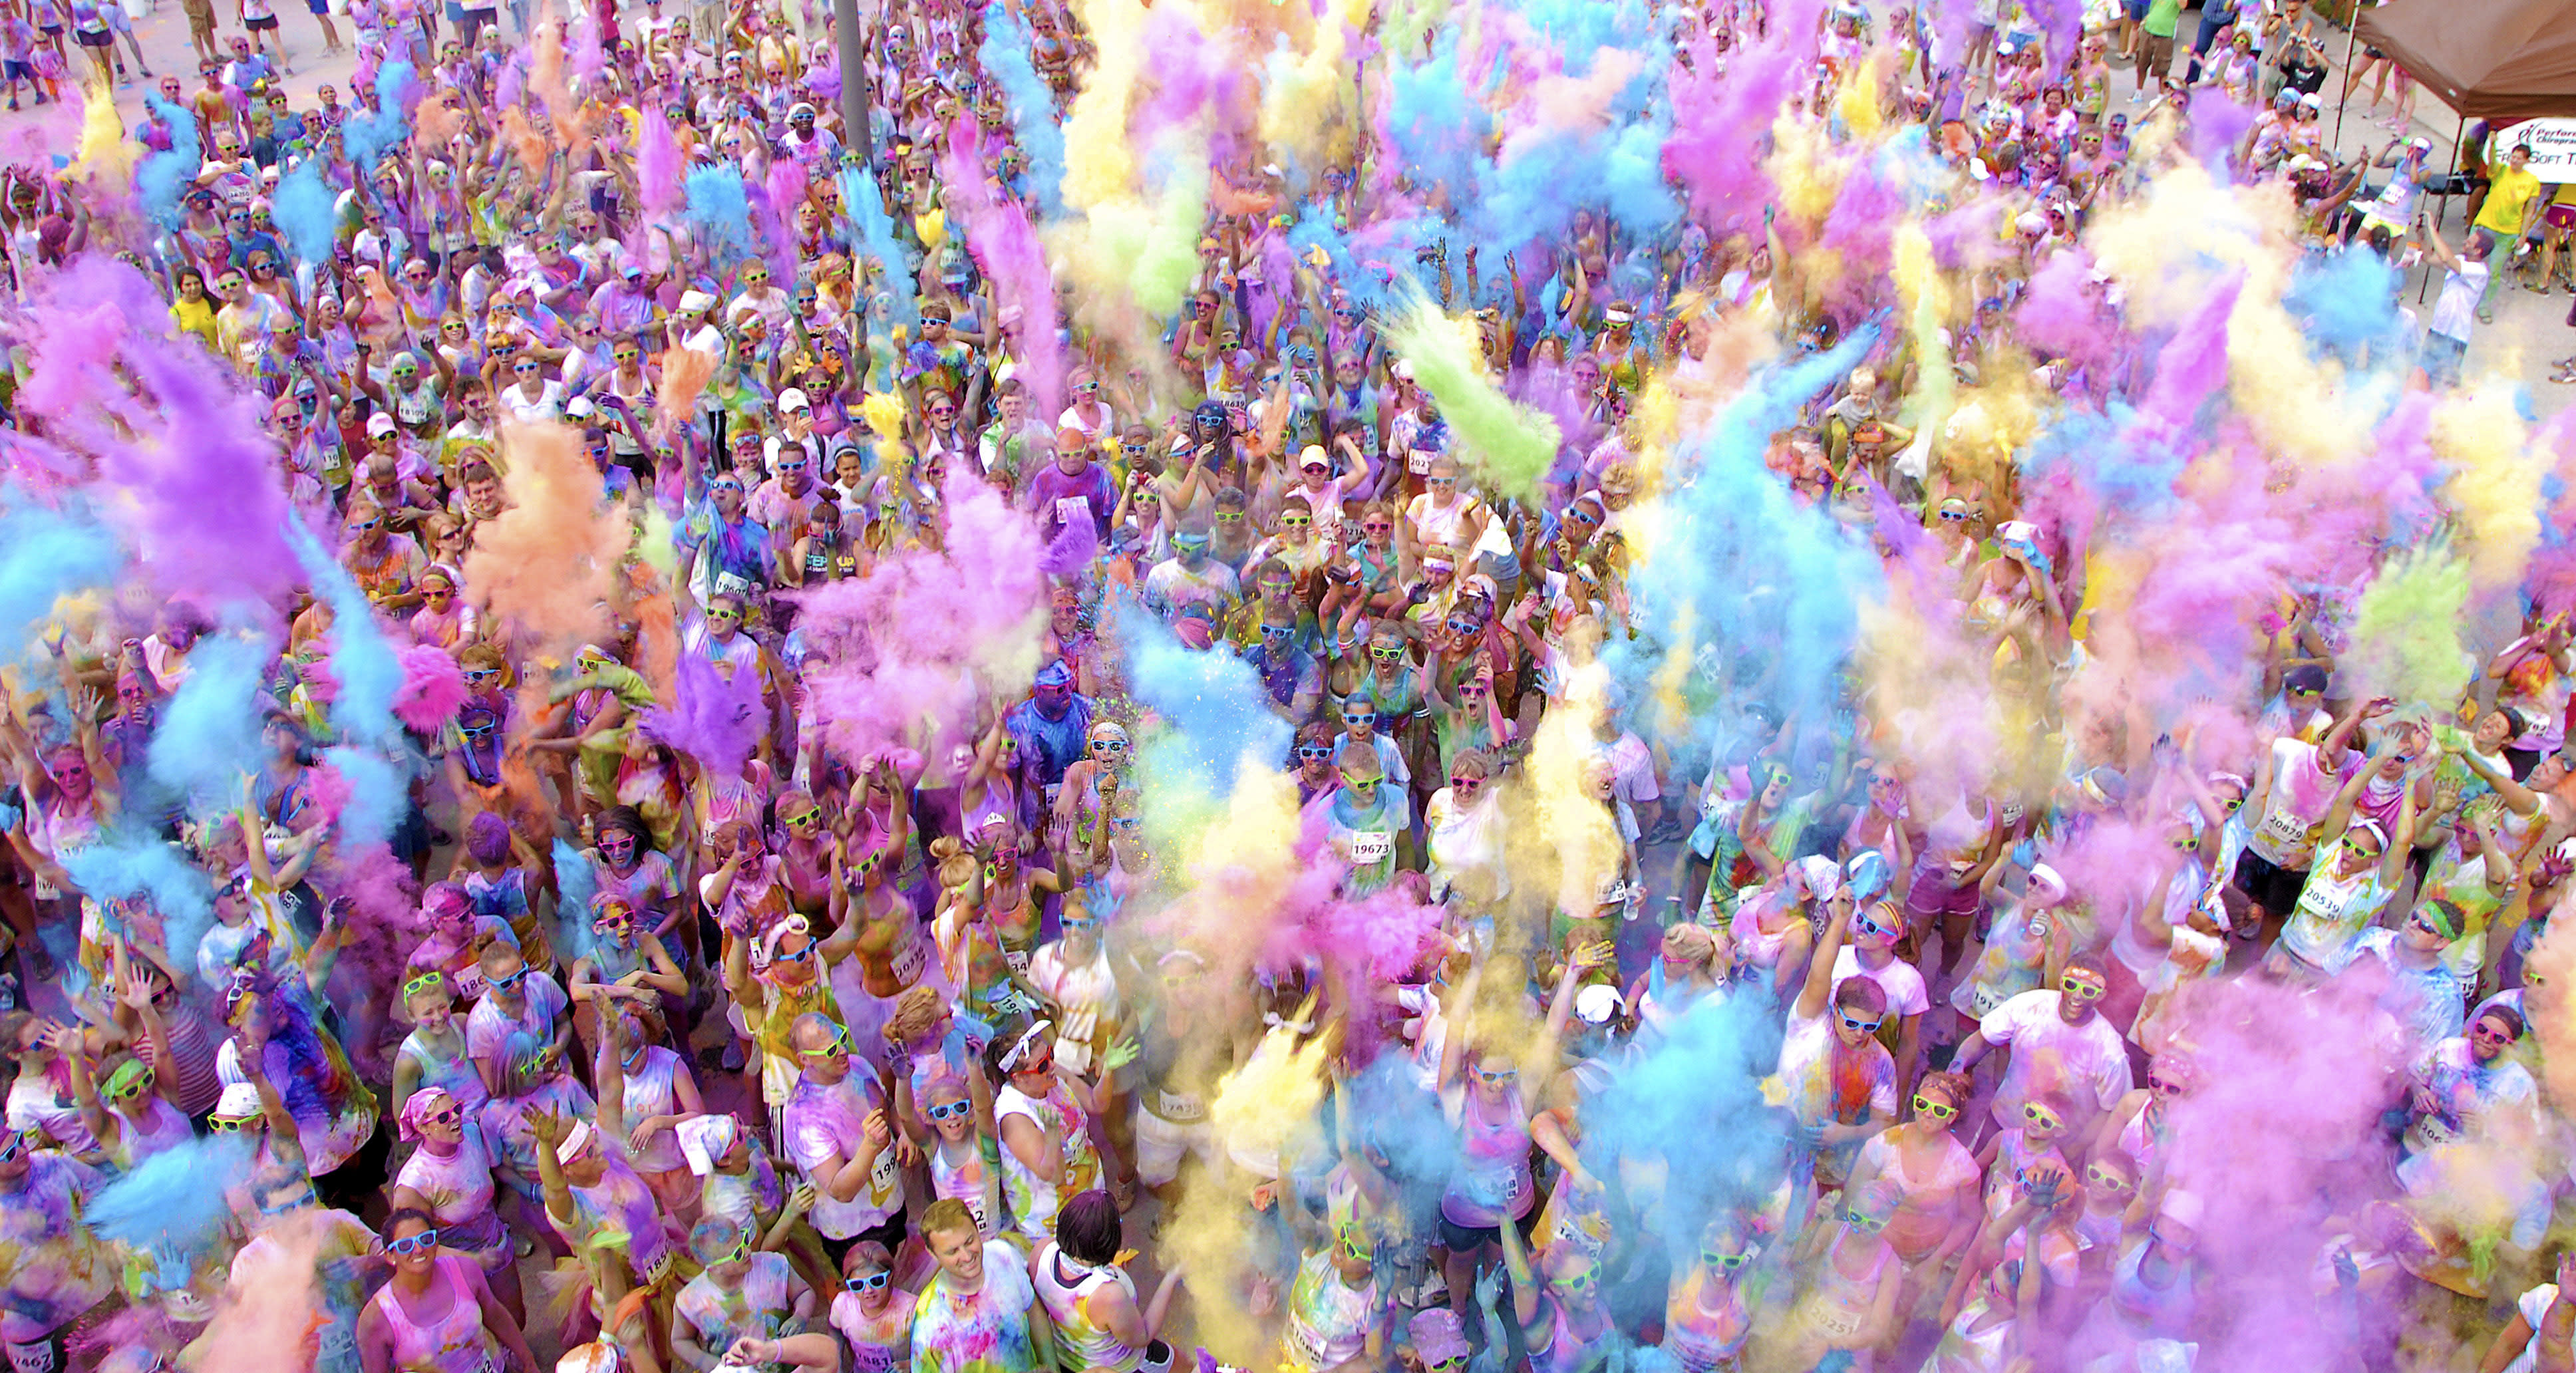 You'll be covered in color at Color Me Rad!